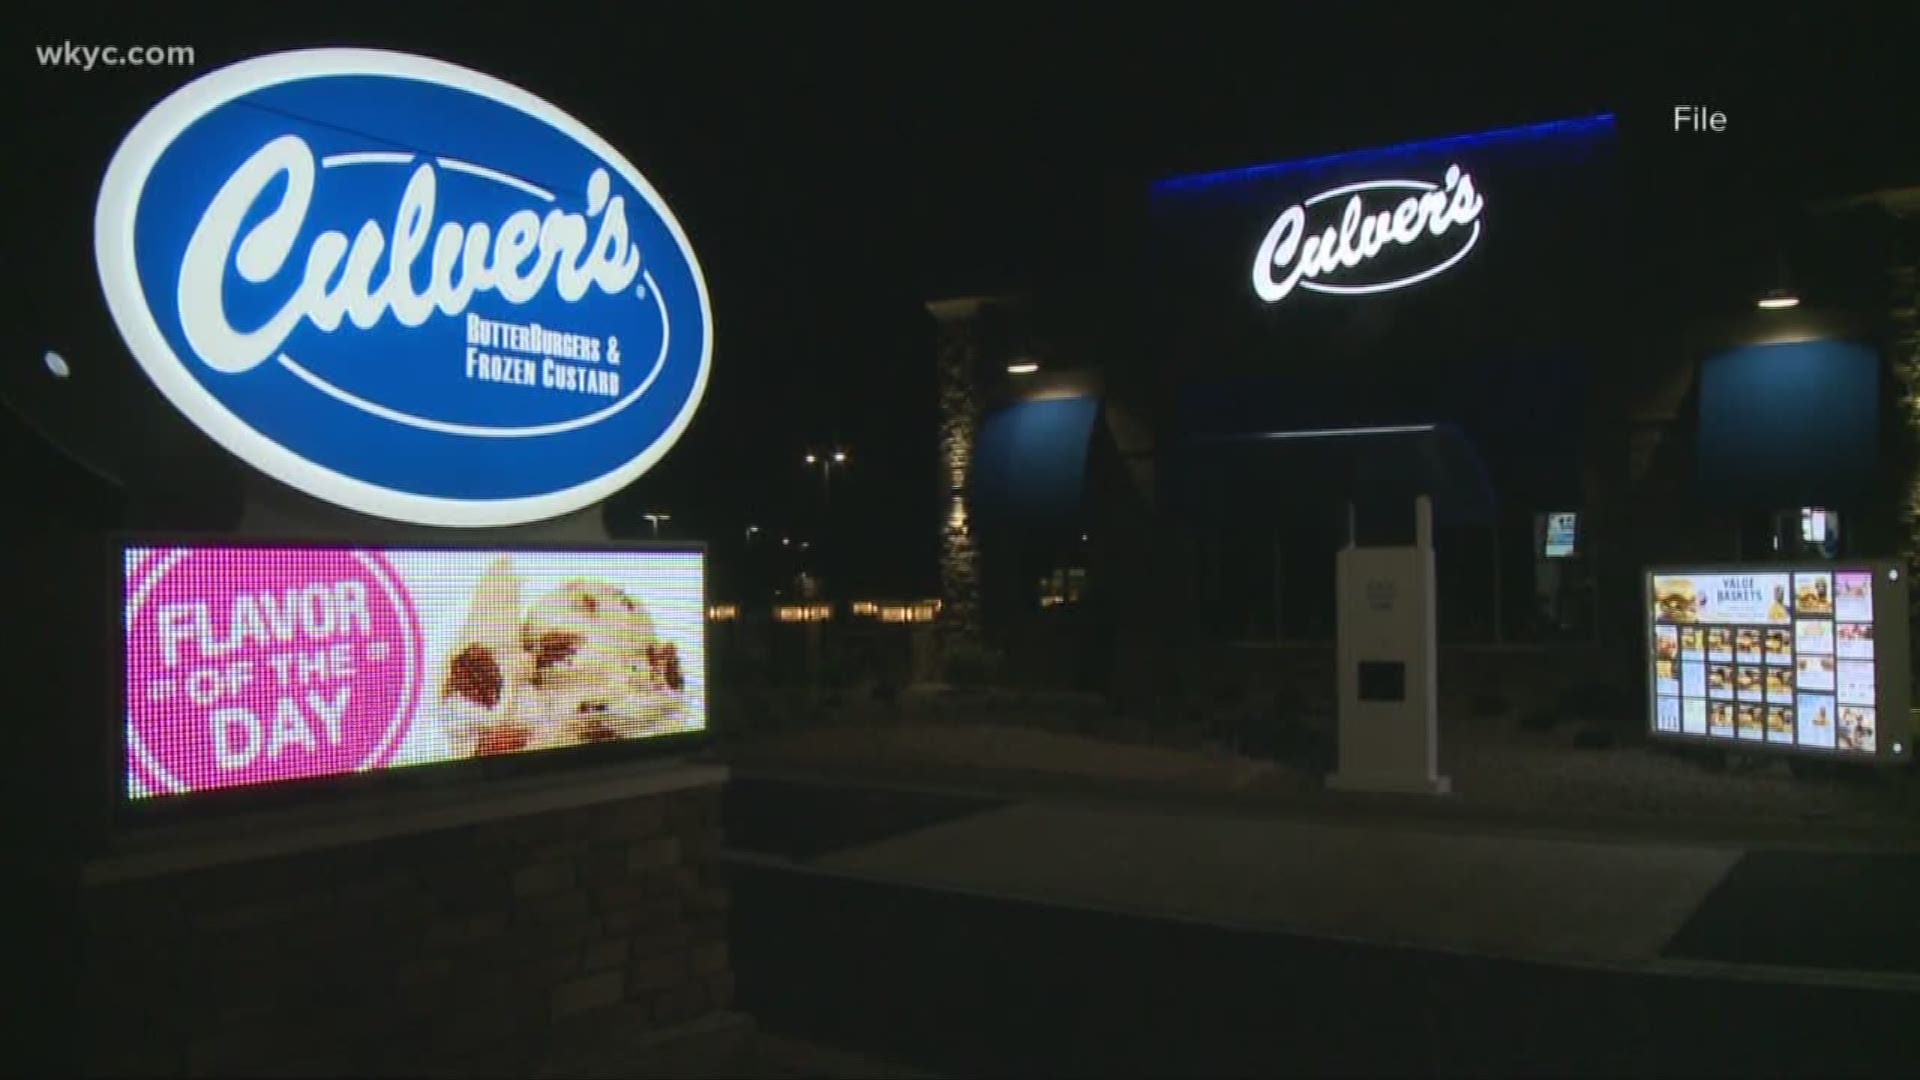 Jan. 21, 2020: It’s time to sink your teeth into a ButterBurger because Culver’s has officially opened its newest Ohio location – this time in Strongsville.